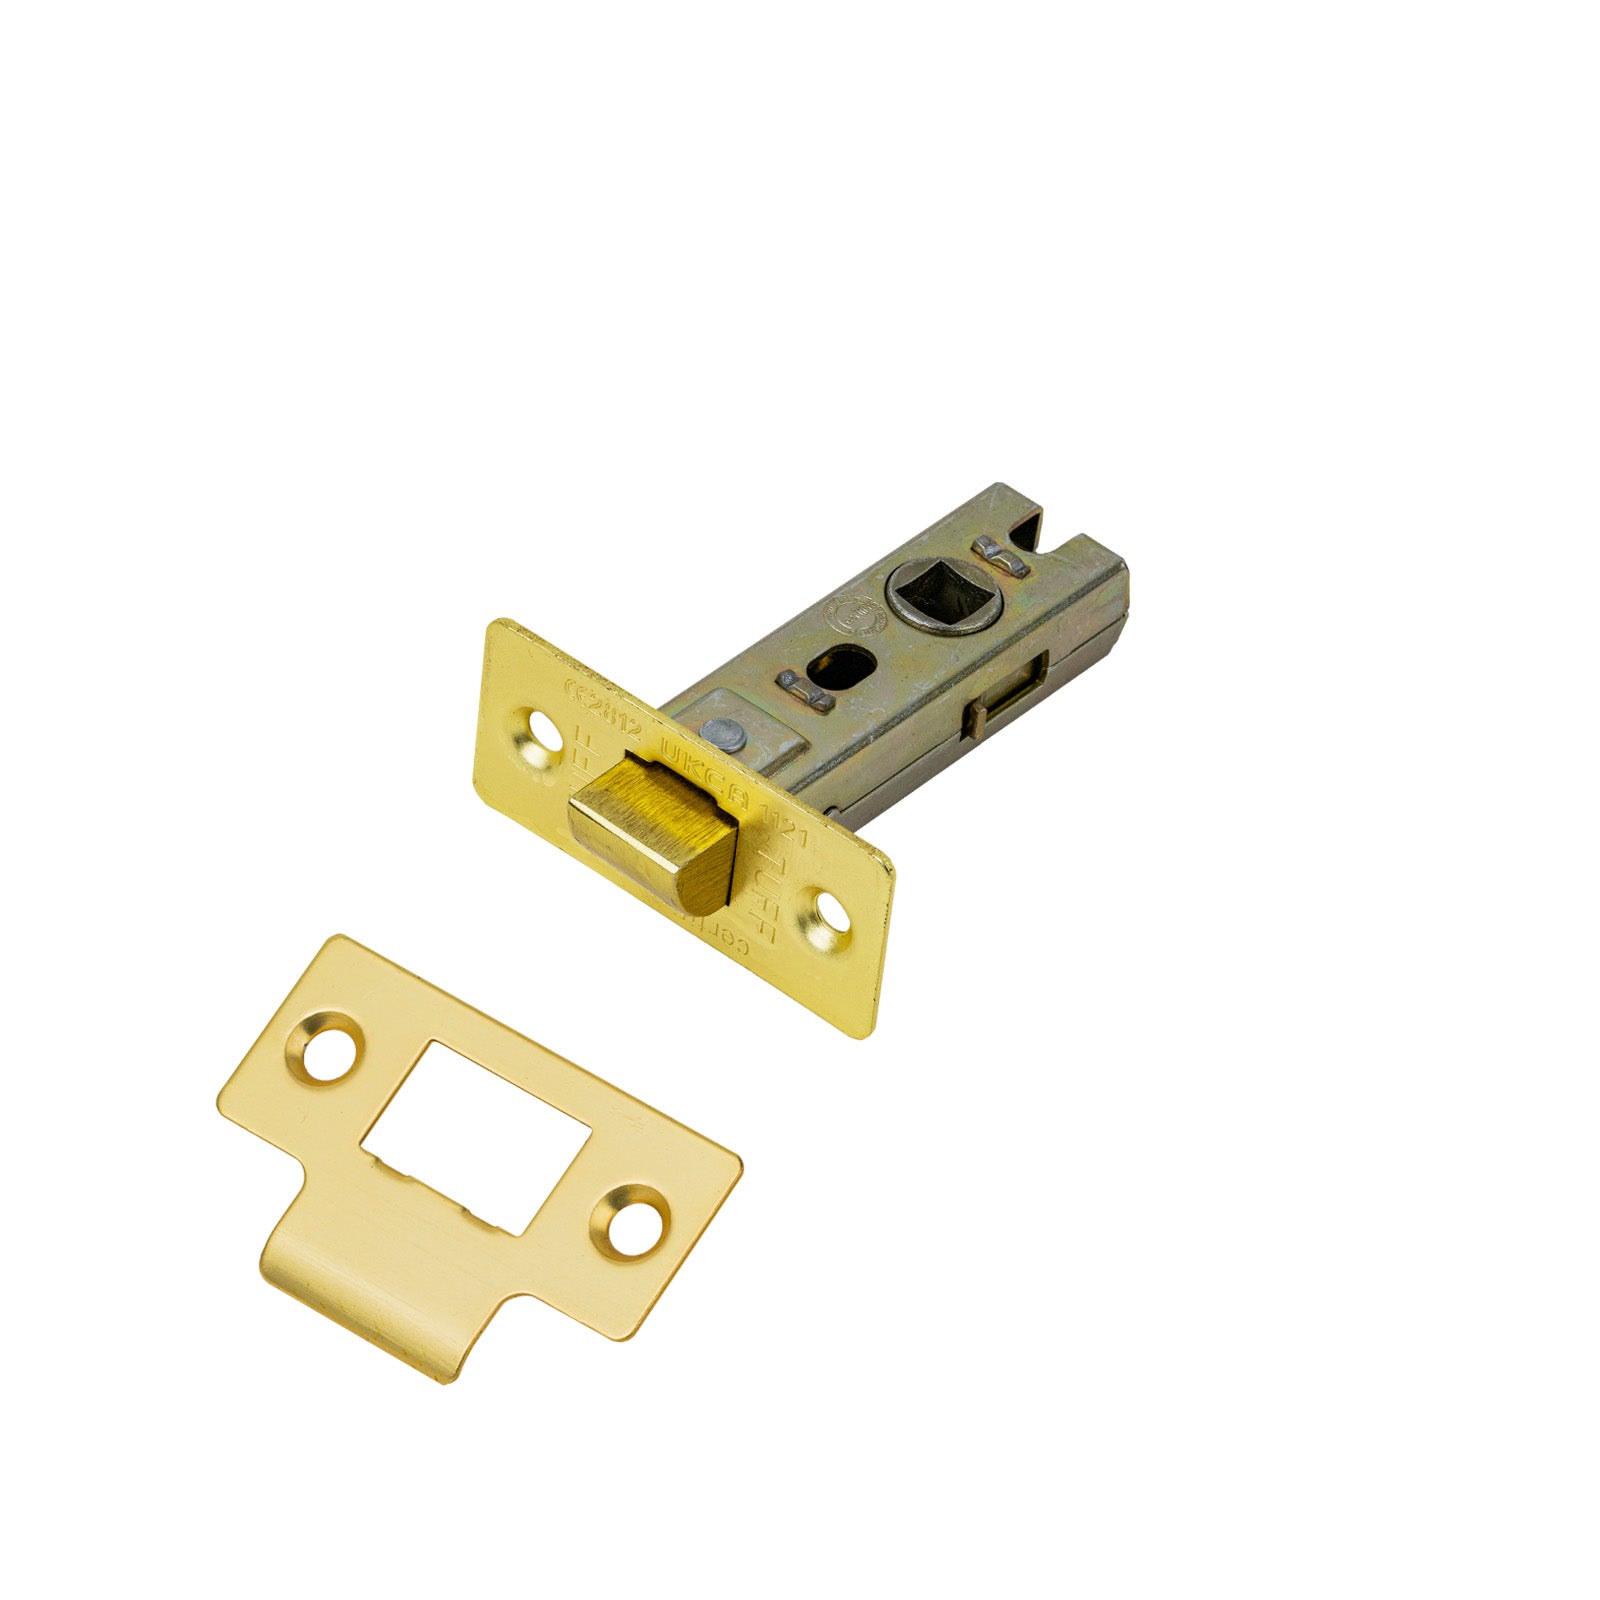 SHOW Tubular Latch - 2.5 Inch with Satin Brass finished forend and striker plate